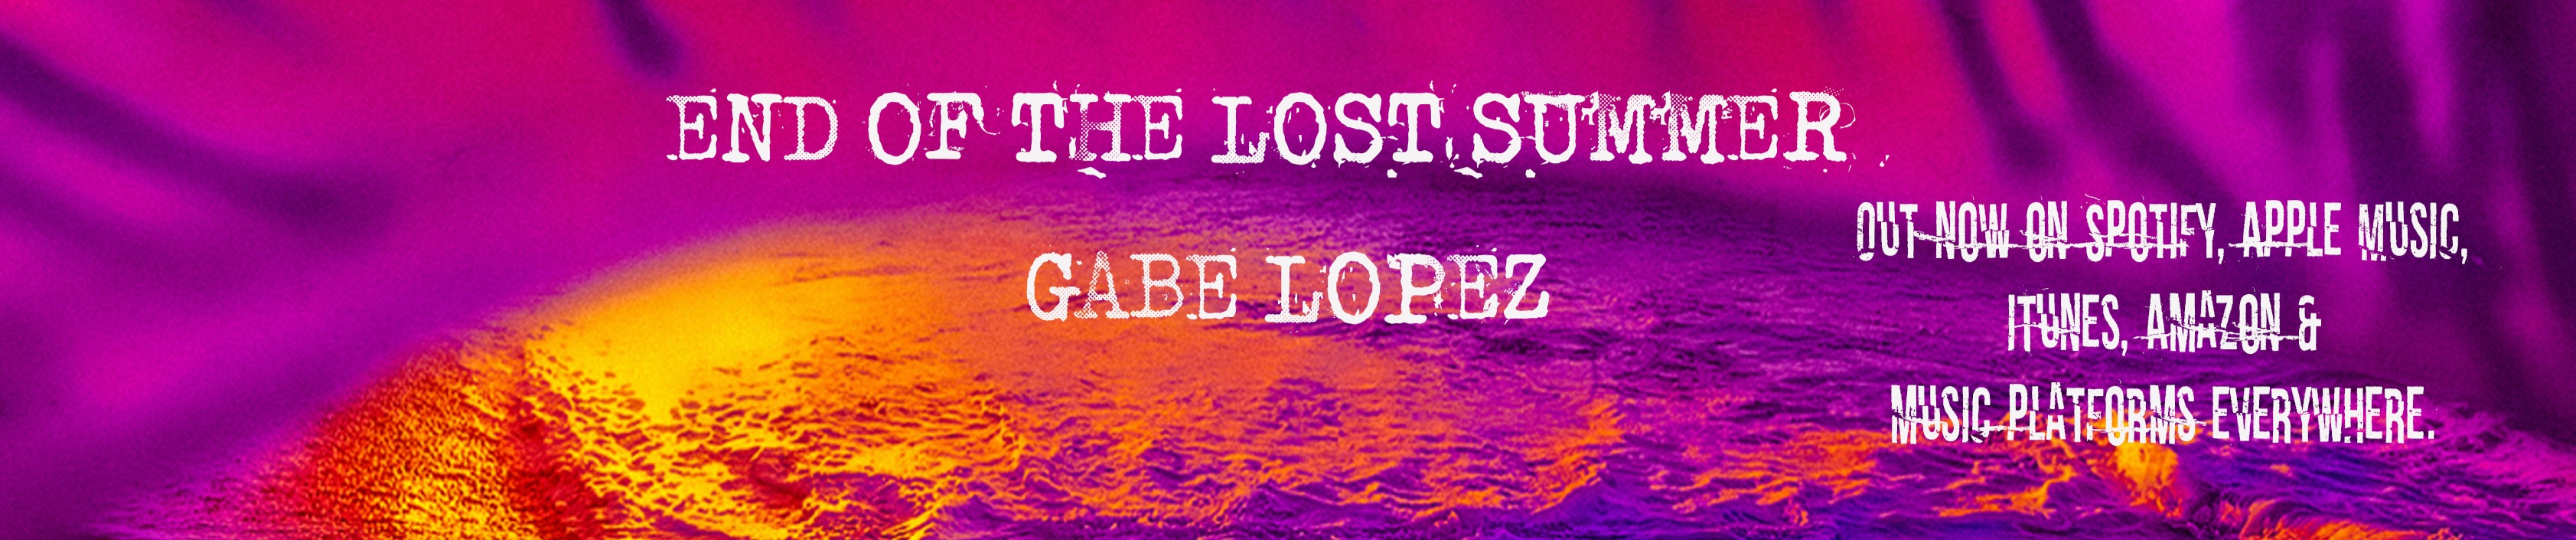 End of the Lost Summer by Gabe Lopez